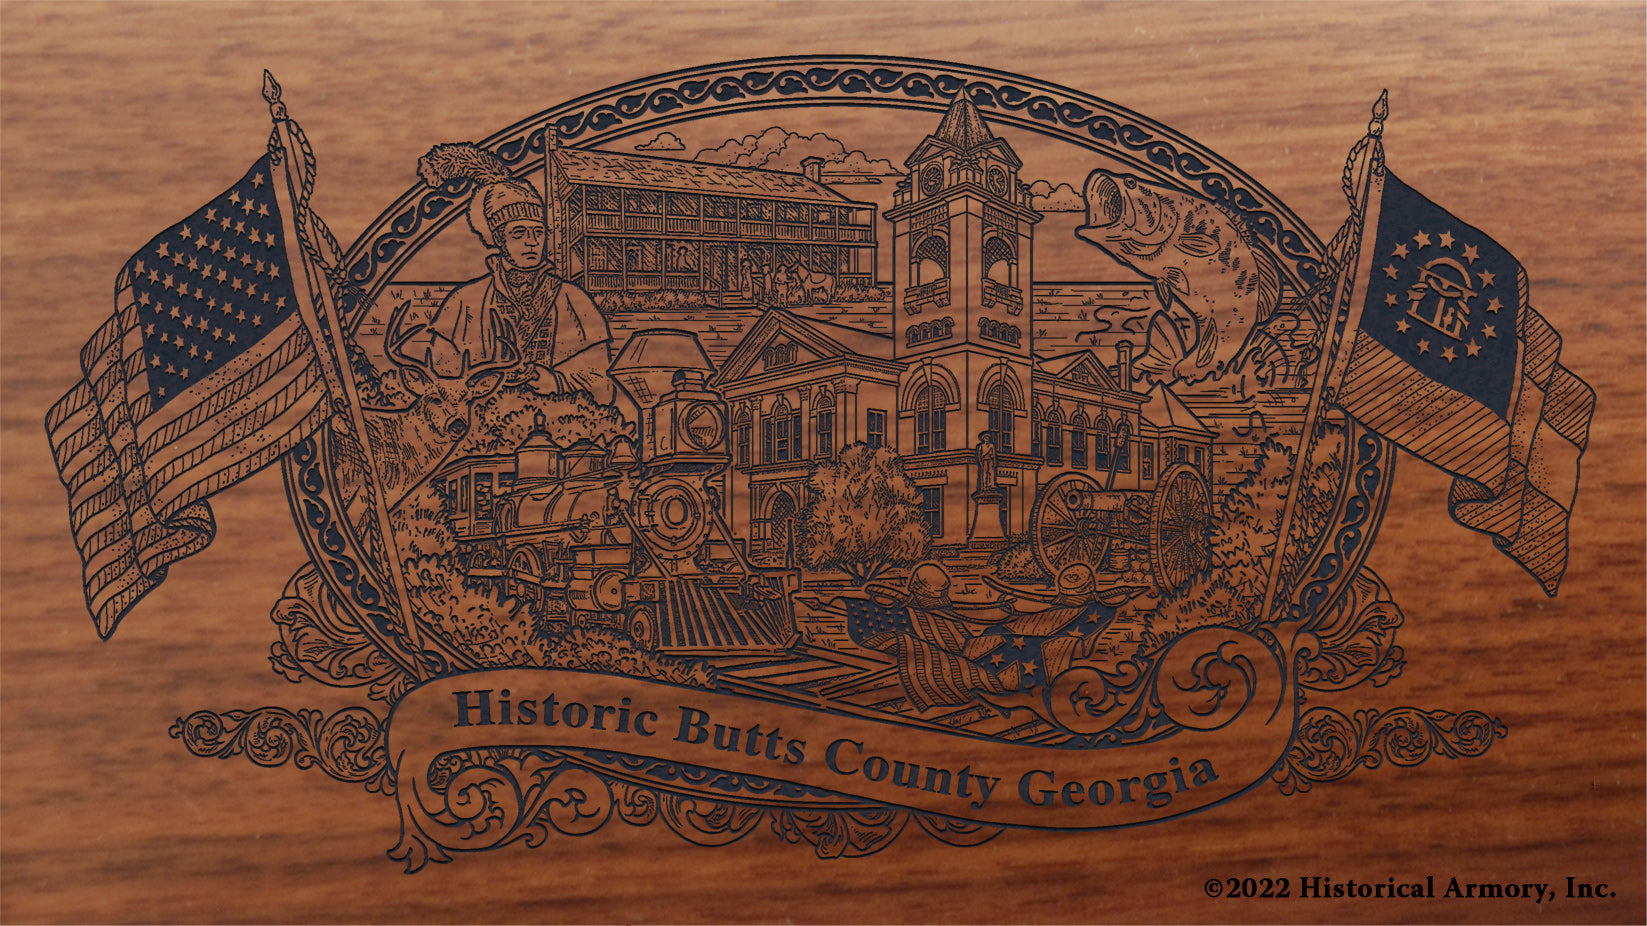 Butts County Georgia Engraved Rifle Buttstock